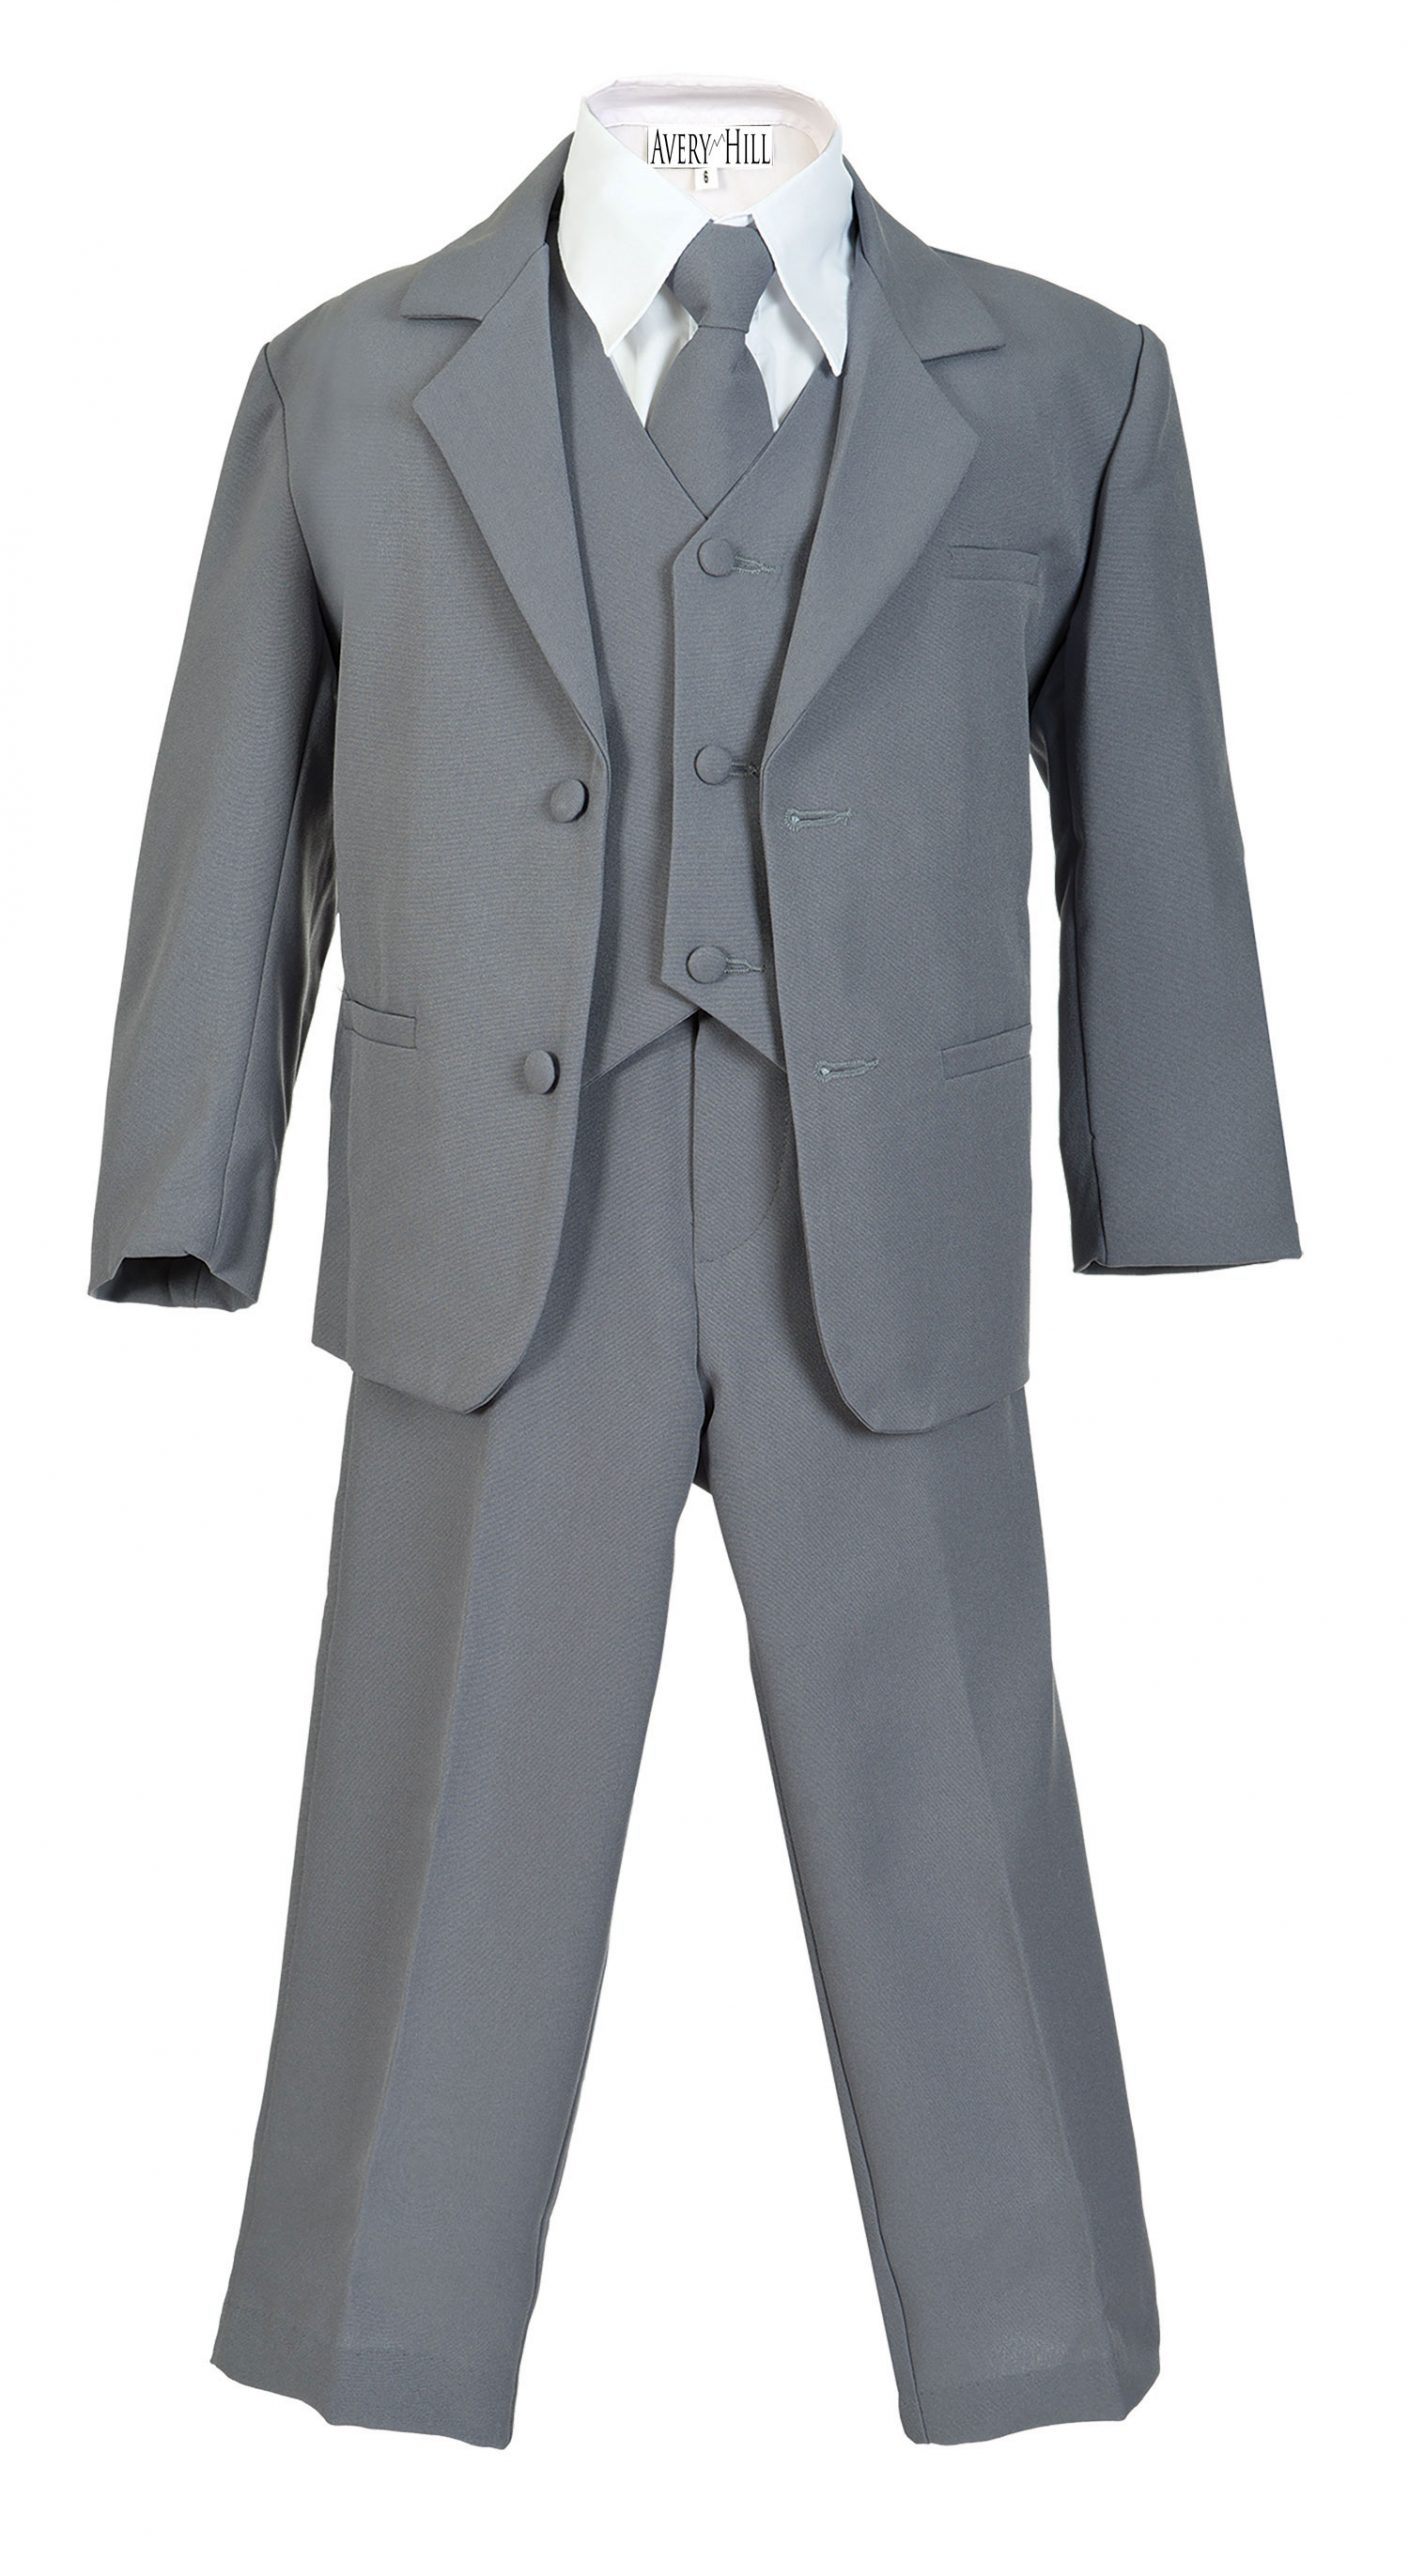 Avery Hill Boys Formal 5 Piece Suit with Shirt and Vest Slate Gray - XL